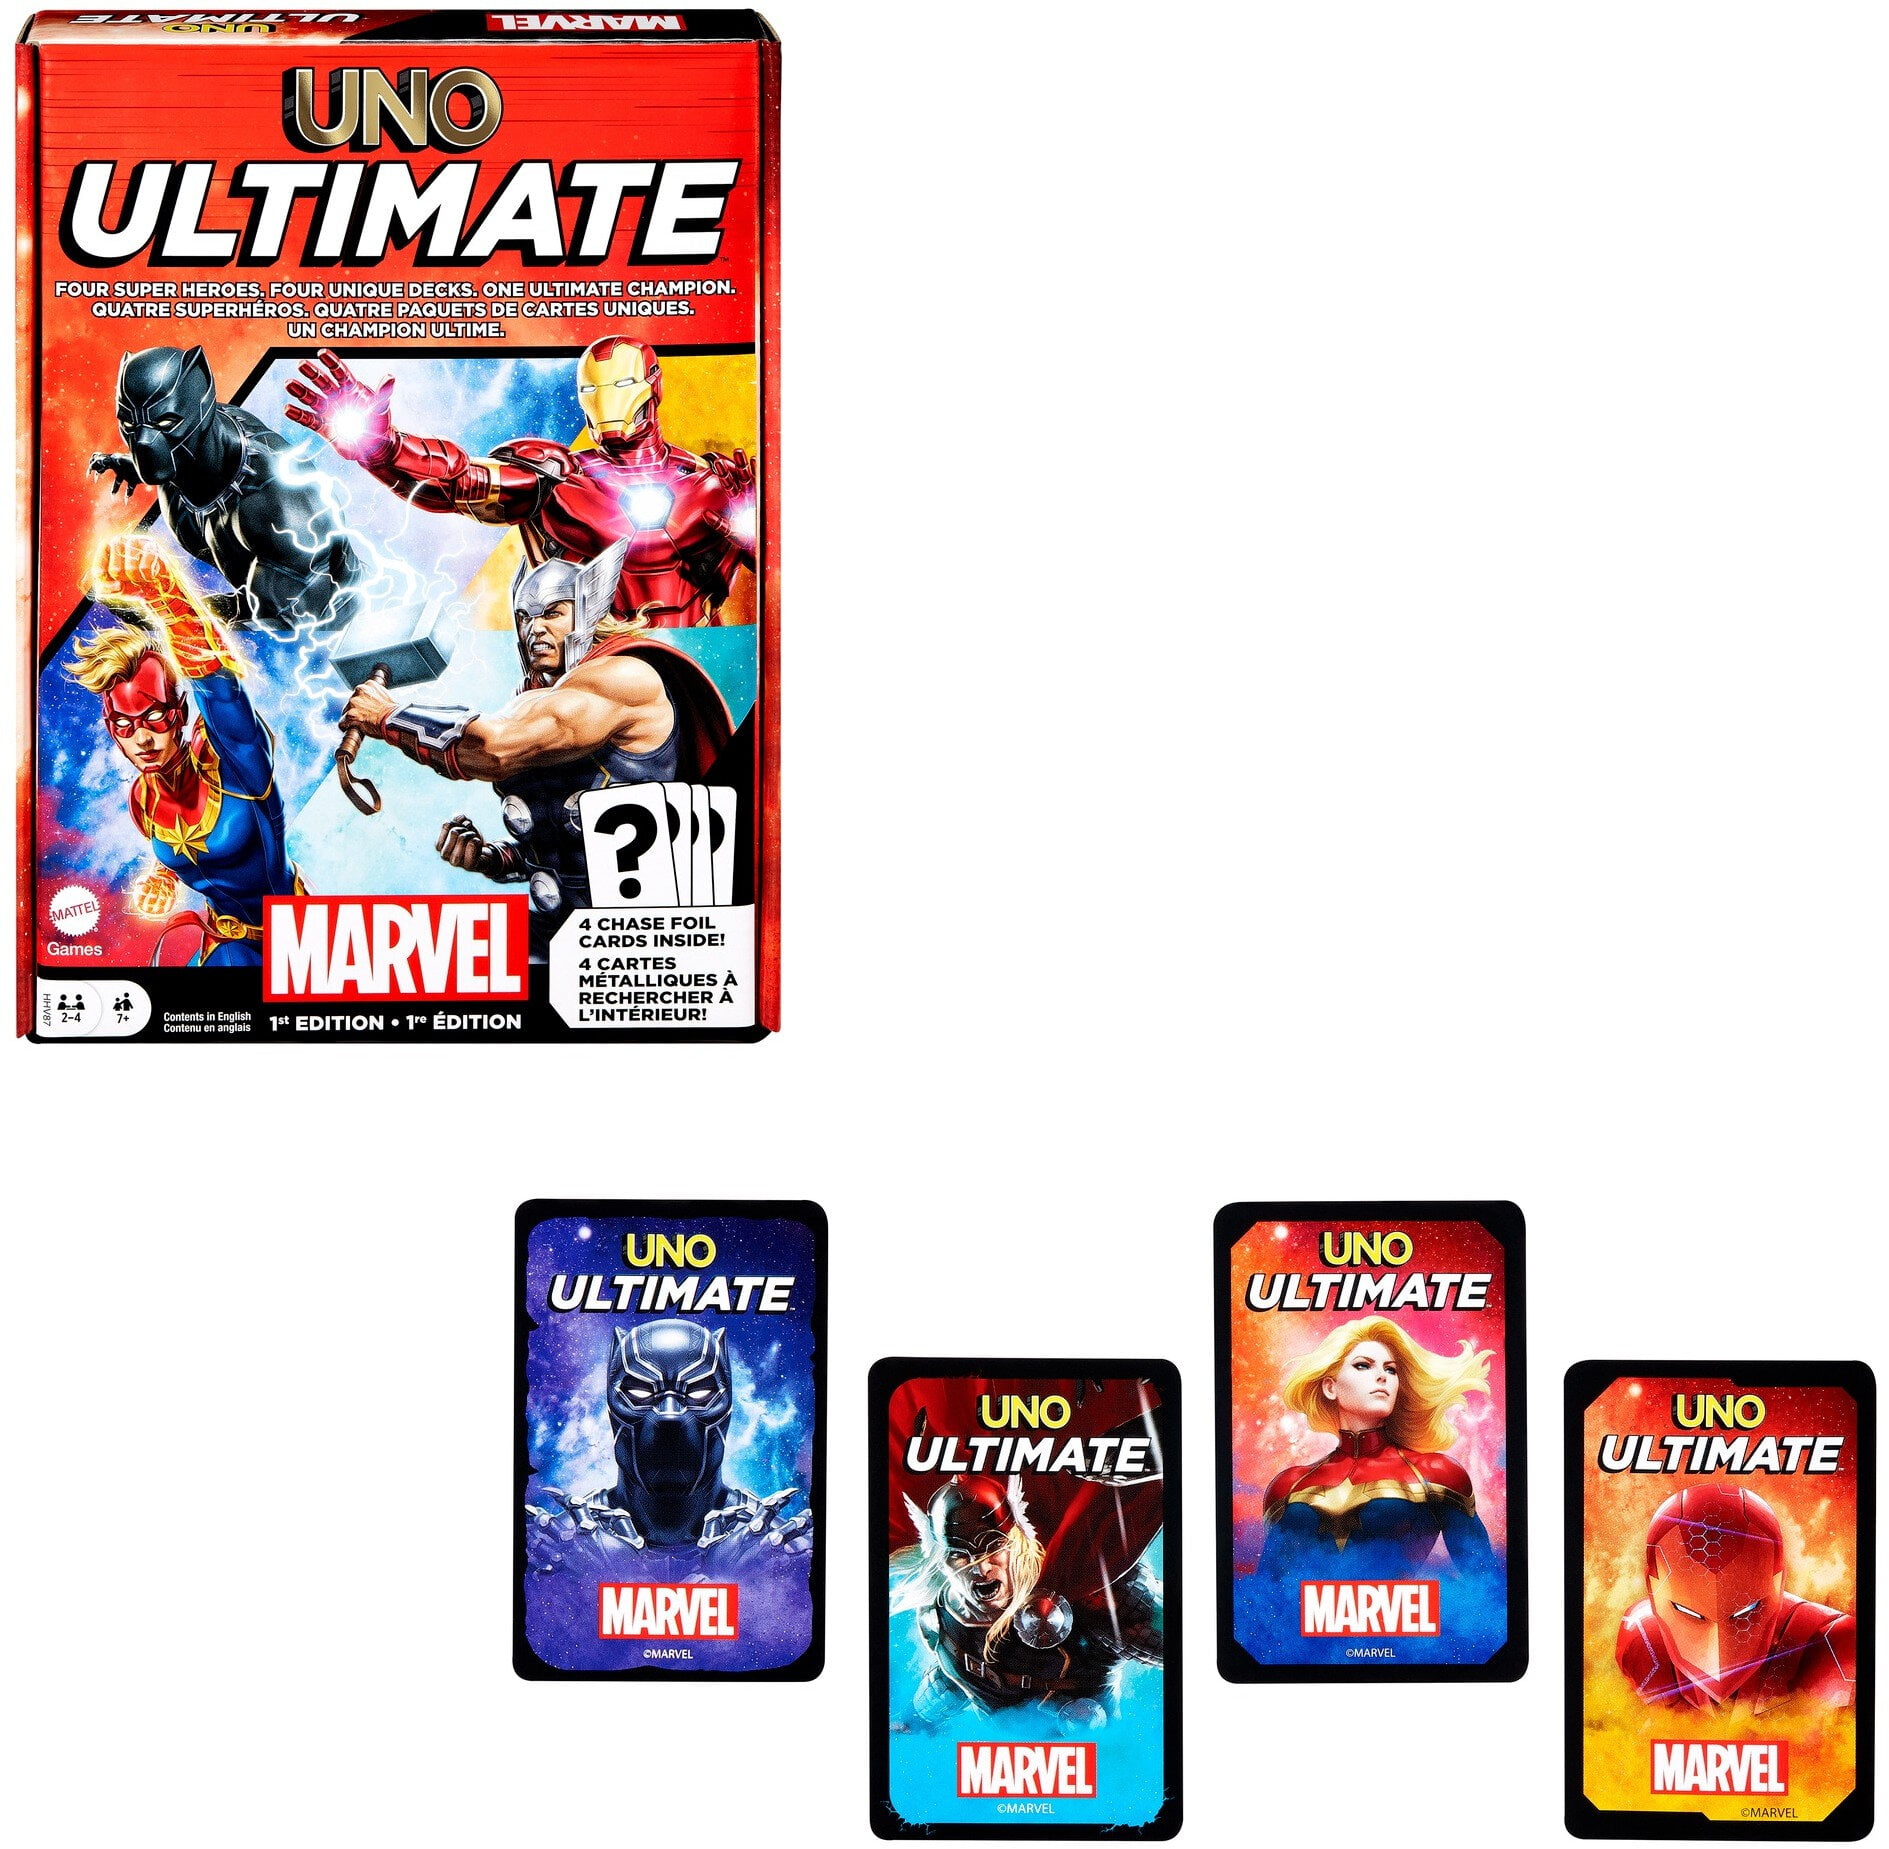 MARVEL 75TH ANNIVERSARY CARDS PICK ANY 3 CARDS TO COMPLETE YOUR SET 